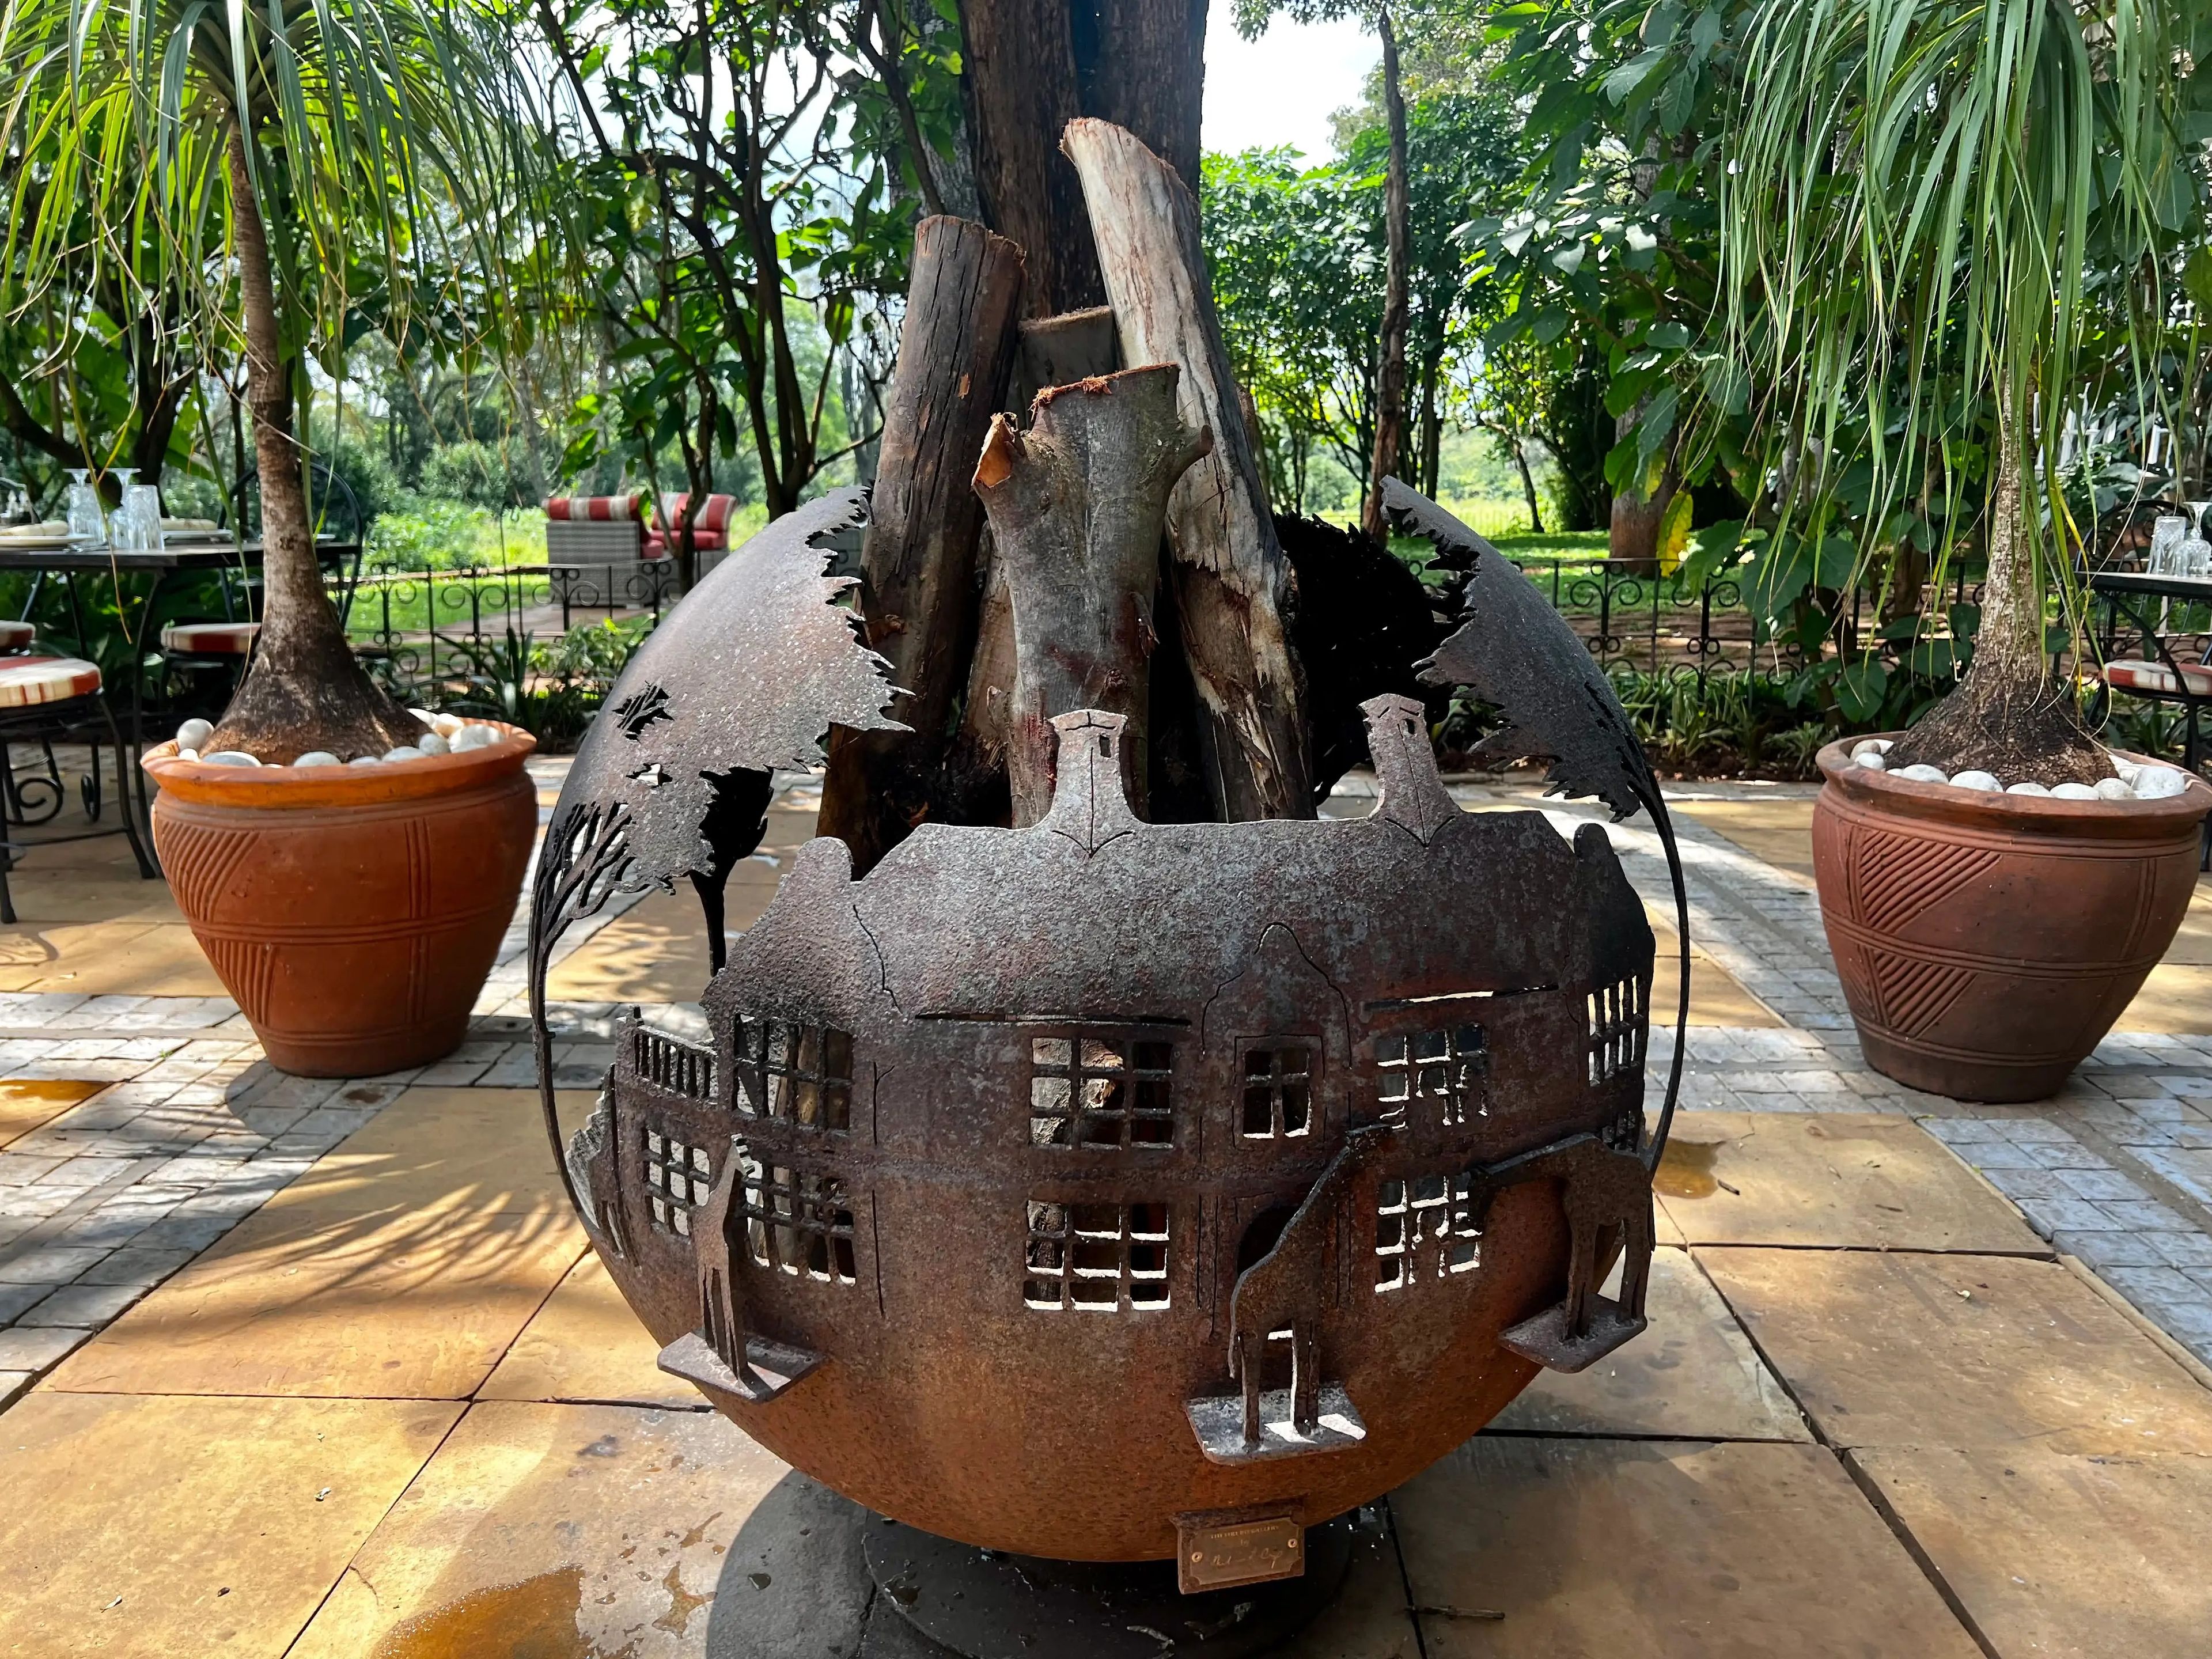 Fire pit with giraffe carvings 